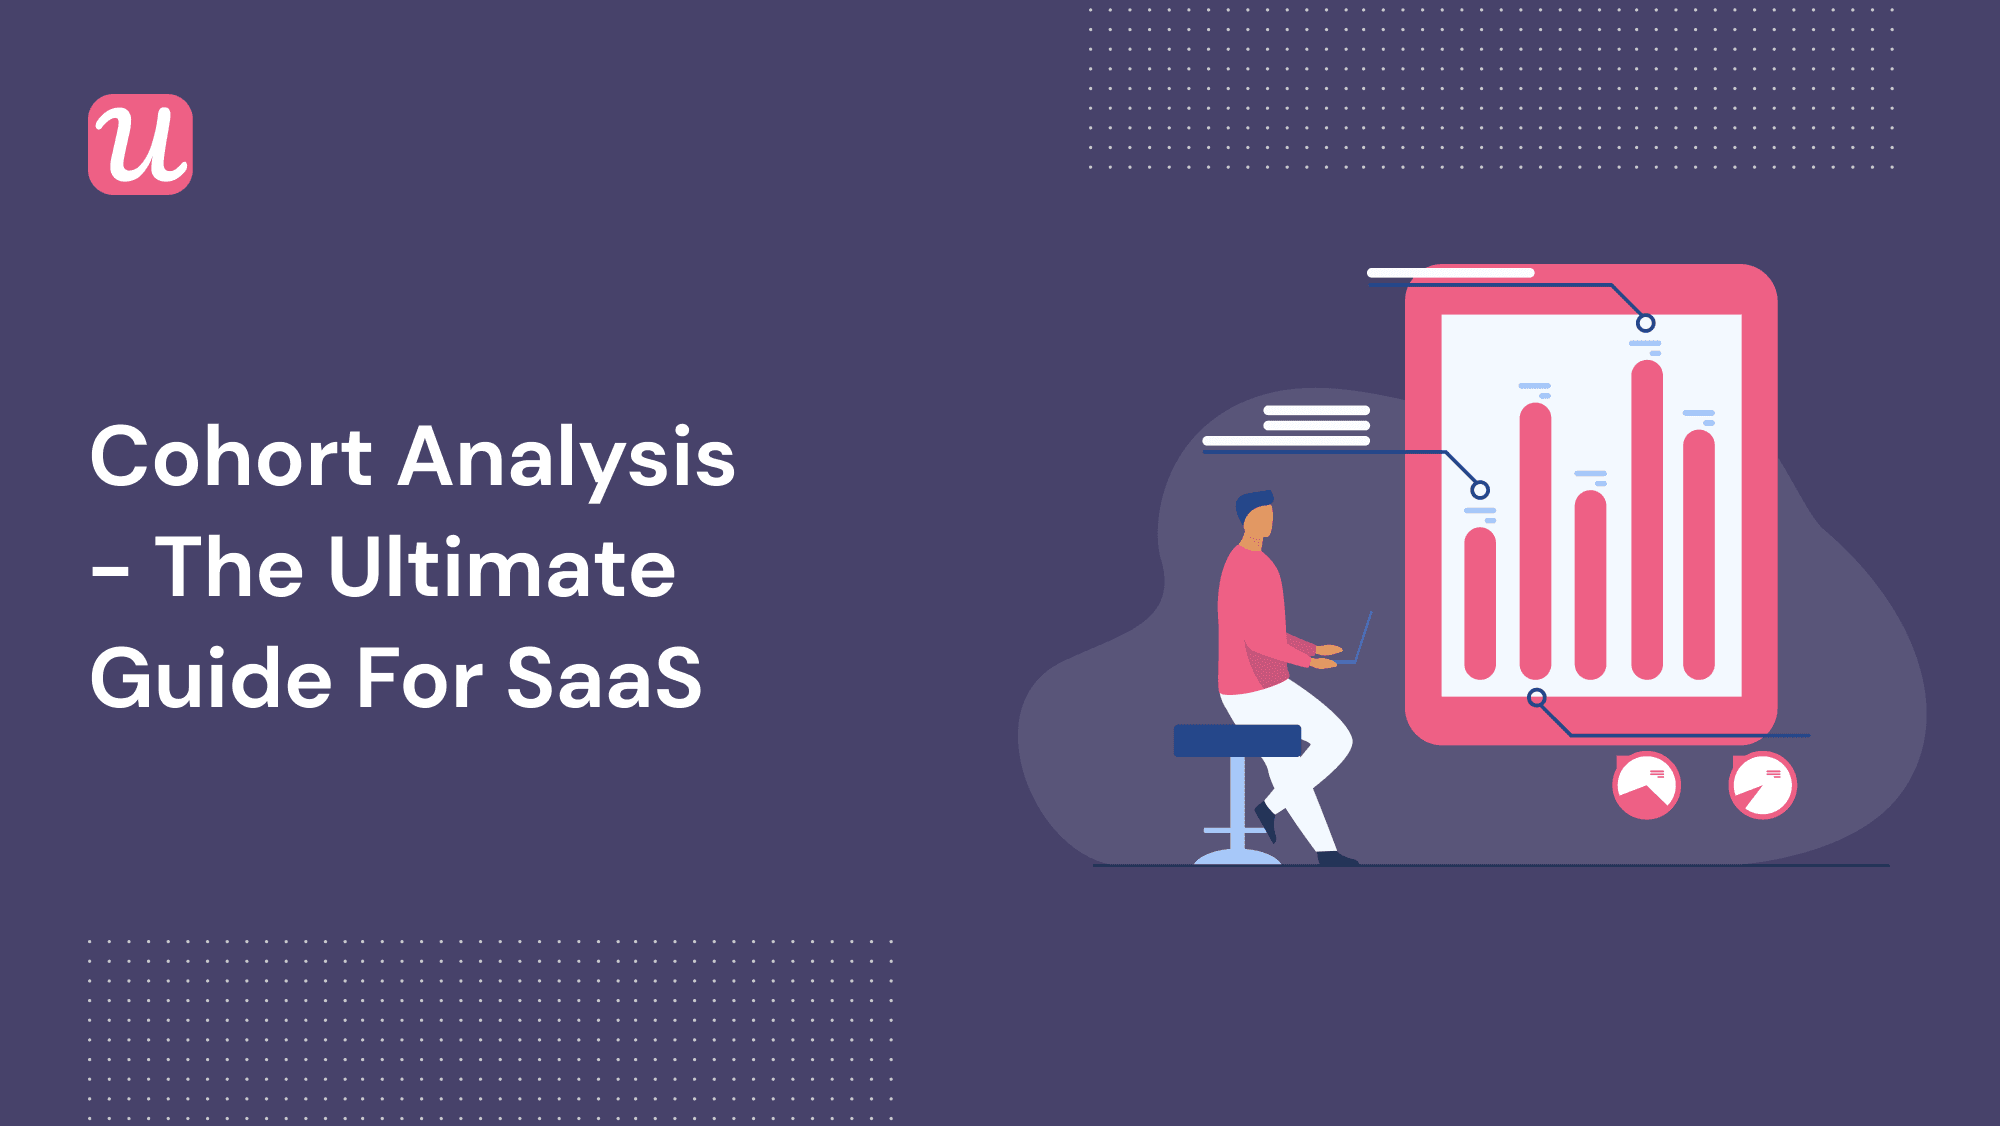 Cohort Analysis - The Ultimate Guide for SaaS